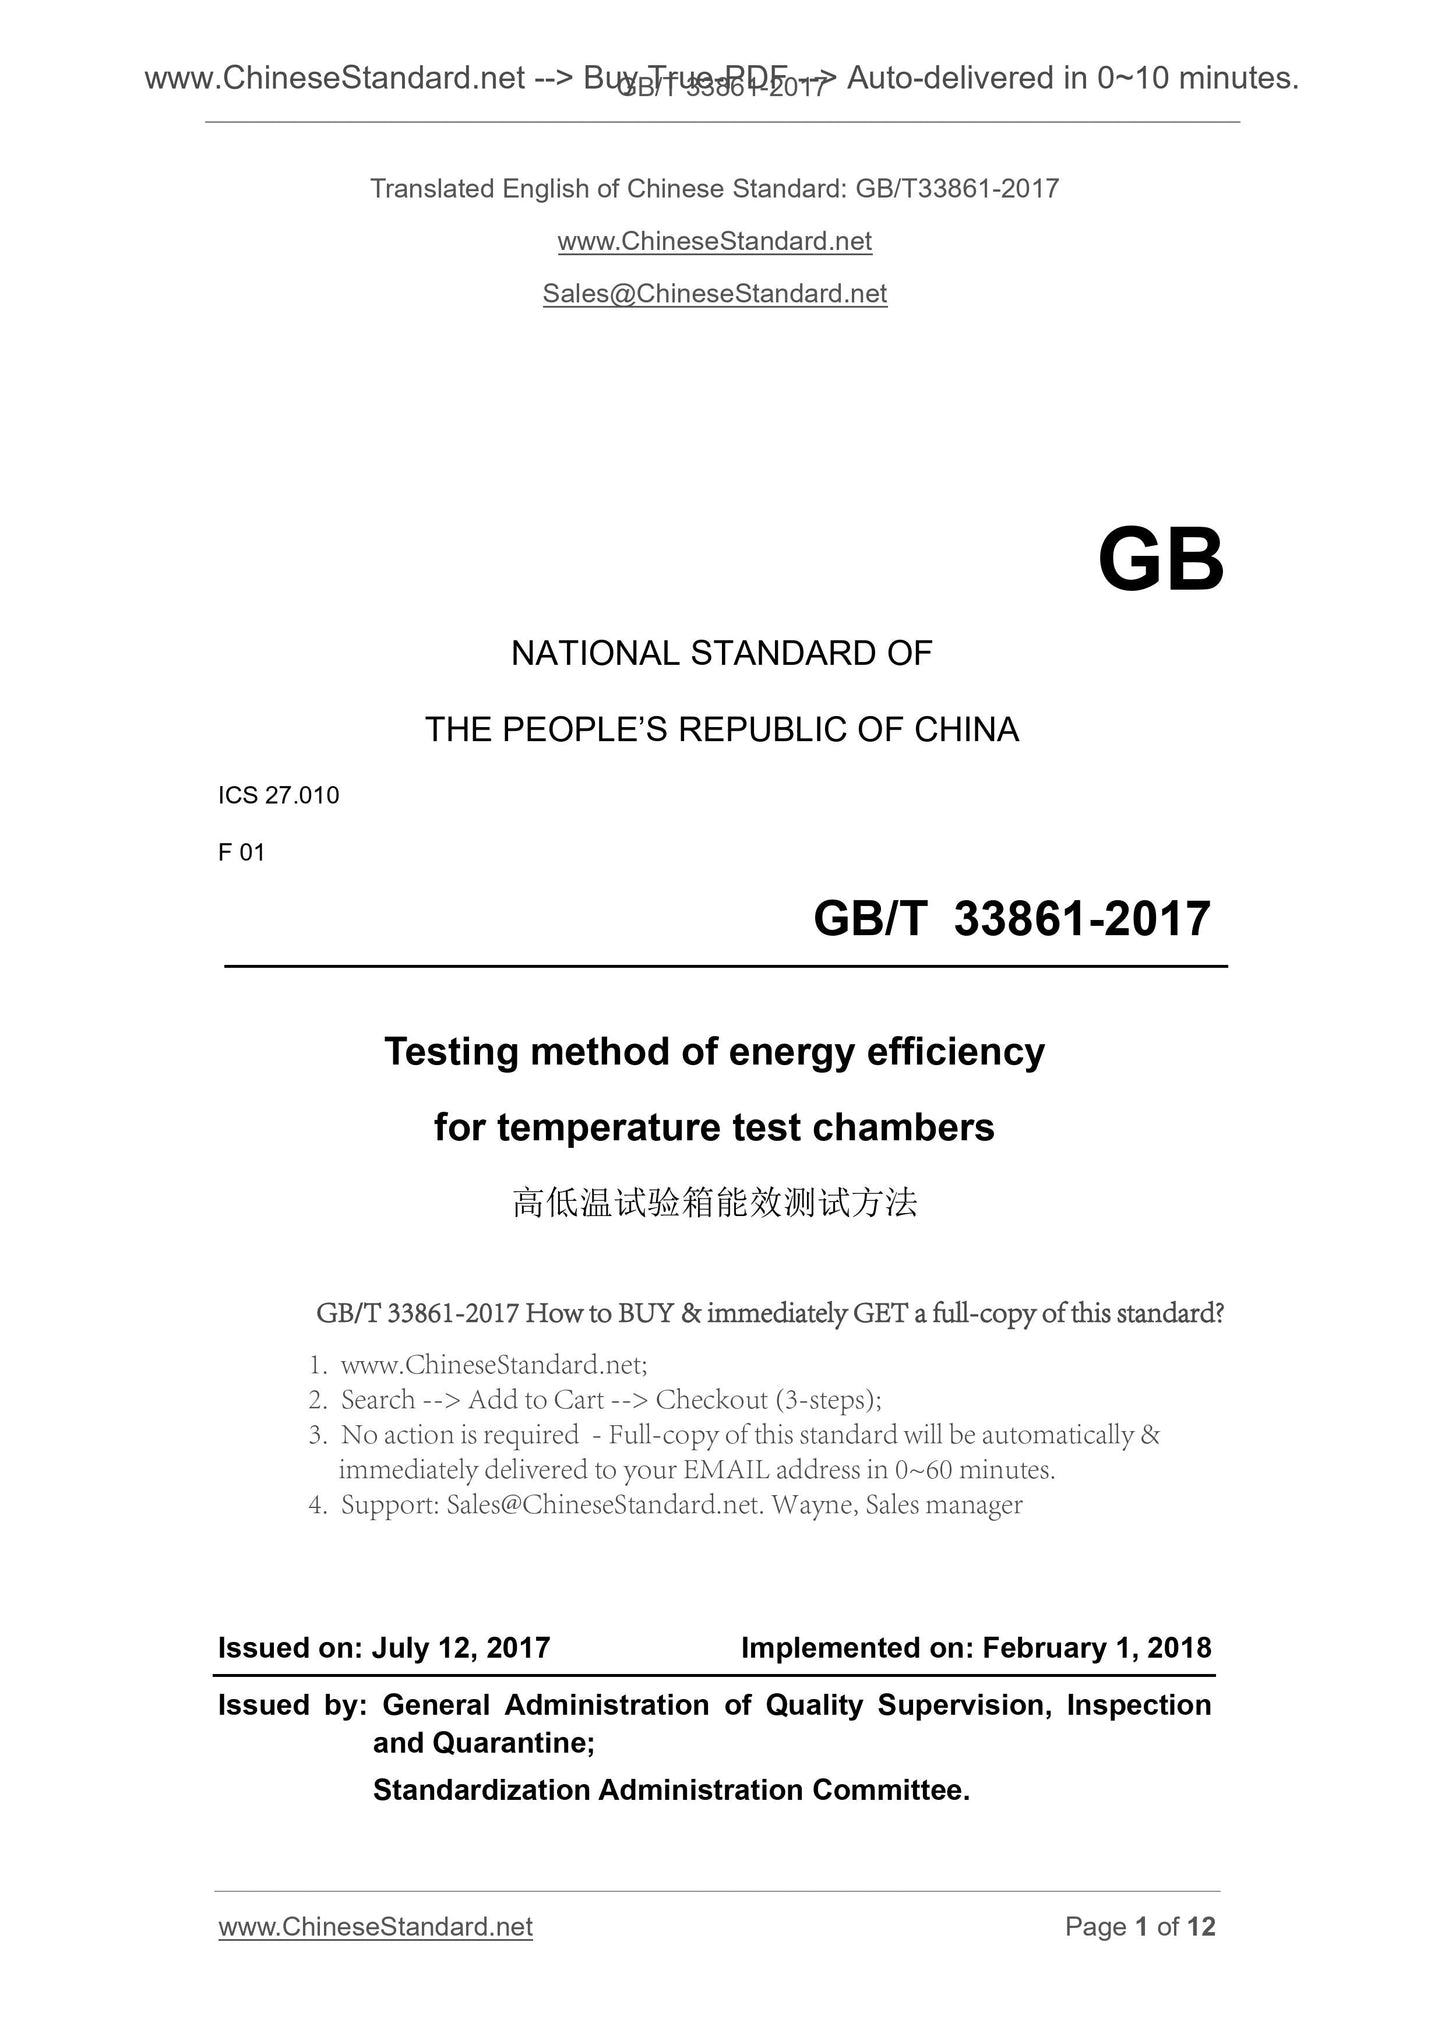 GB/T 33861-2017 Page 1